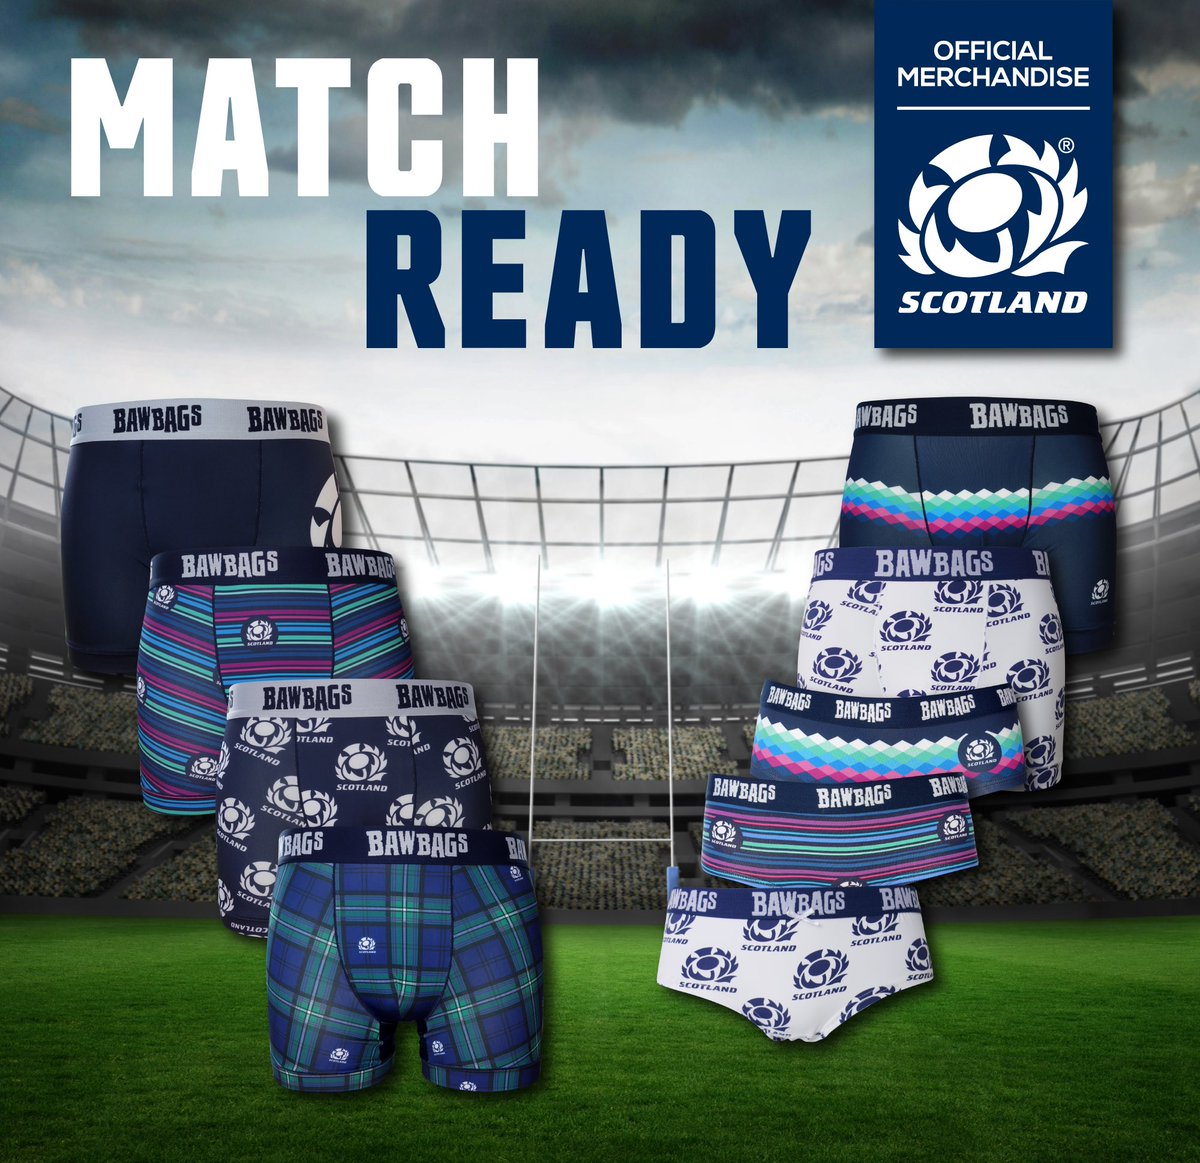 We’re ready!! Let’s go @Scotlandteam!! 💪 🏉 See the full Official Scottish Rugby collection at bawbags.com